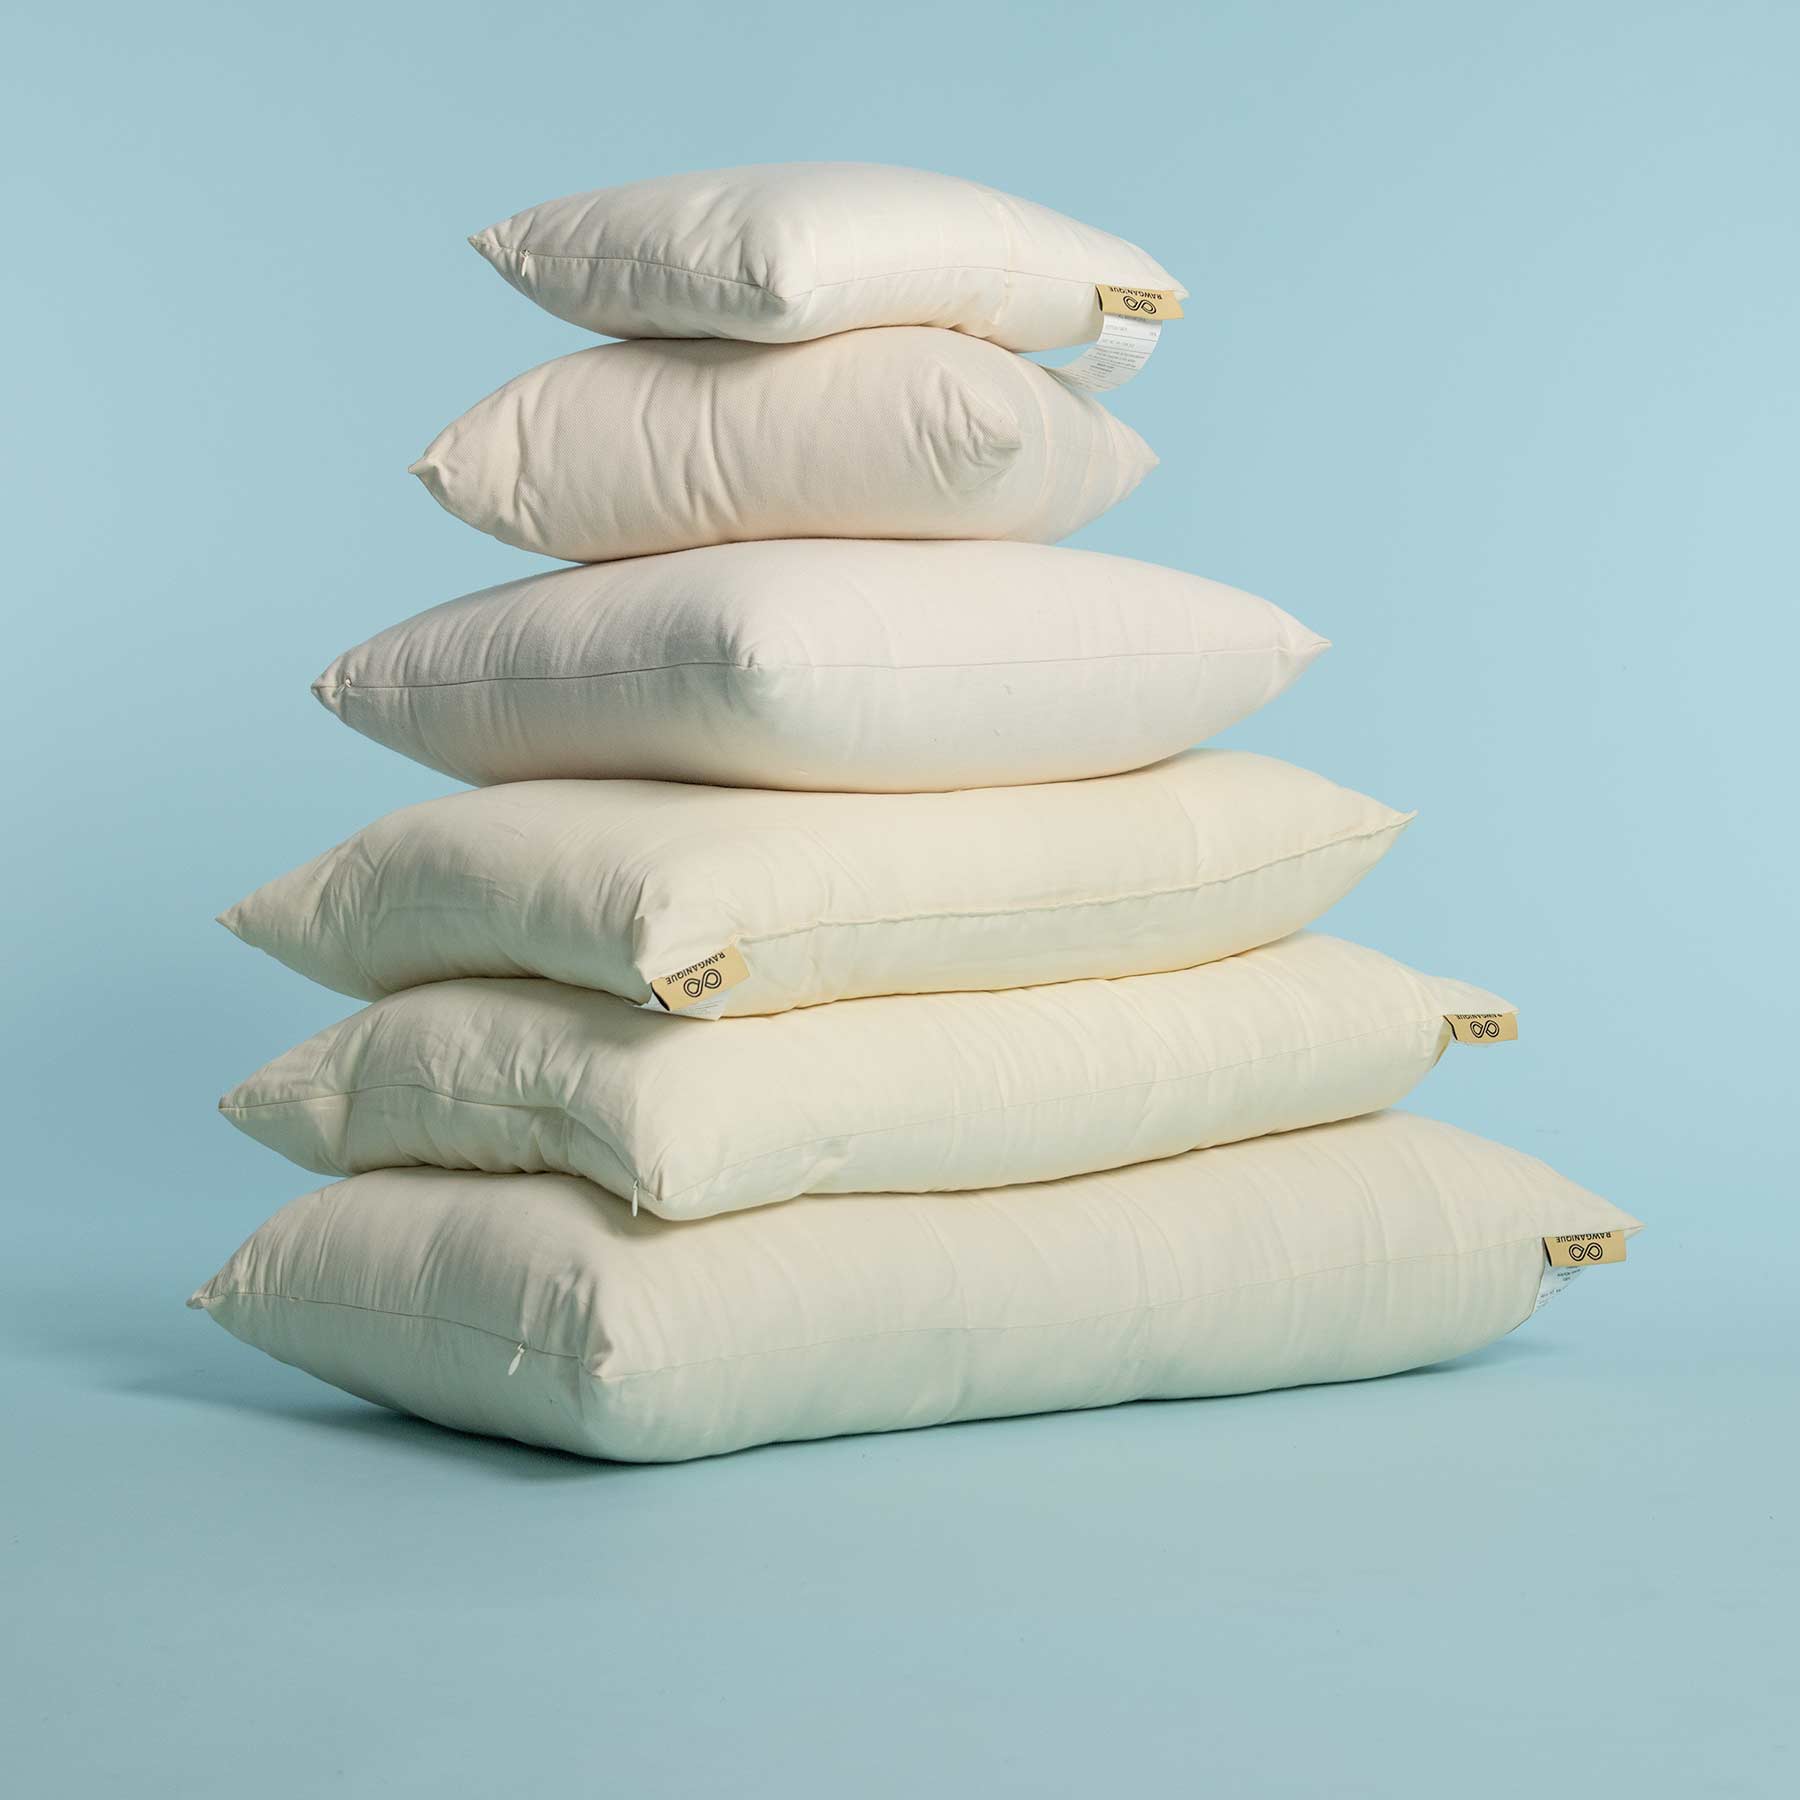 Buy Empty Pillow Shell with No Filling – 100% Cotton Pillow Shell Only, Can  Be Used w/Bulk Down Fill Stuffing for DIY, Making Own Pillows – Standard,  Queen, King Sizes (Standard, 250TC.)